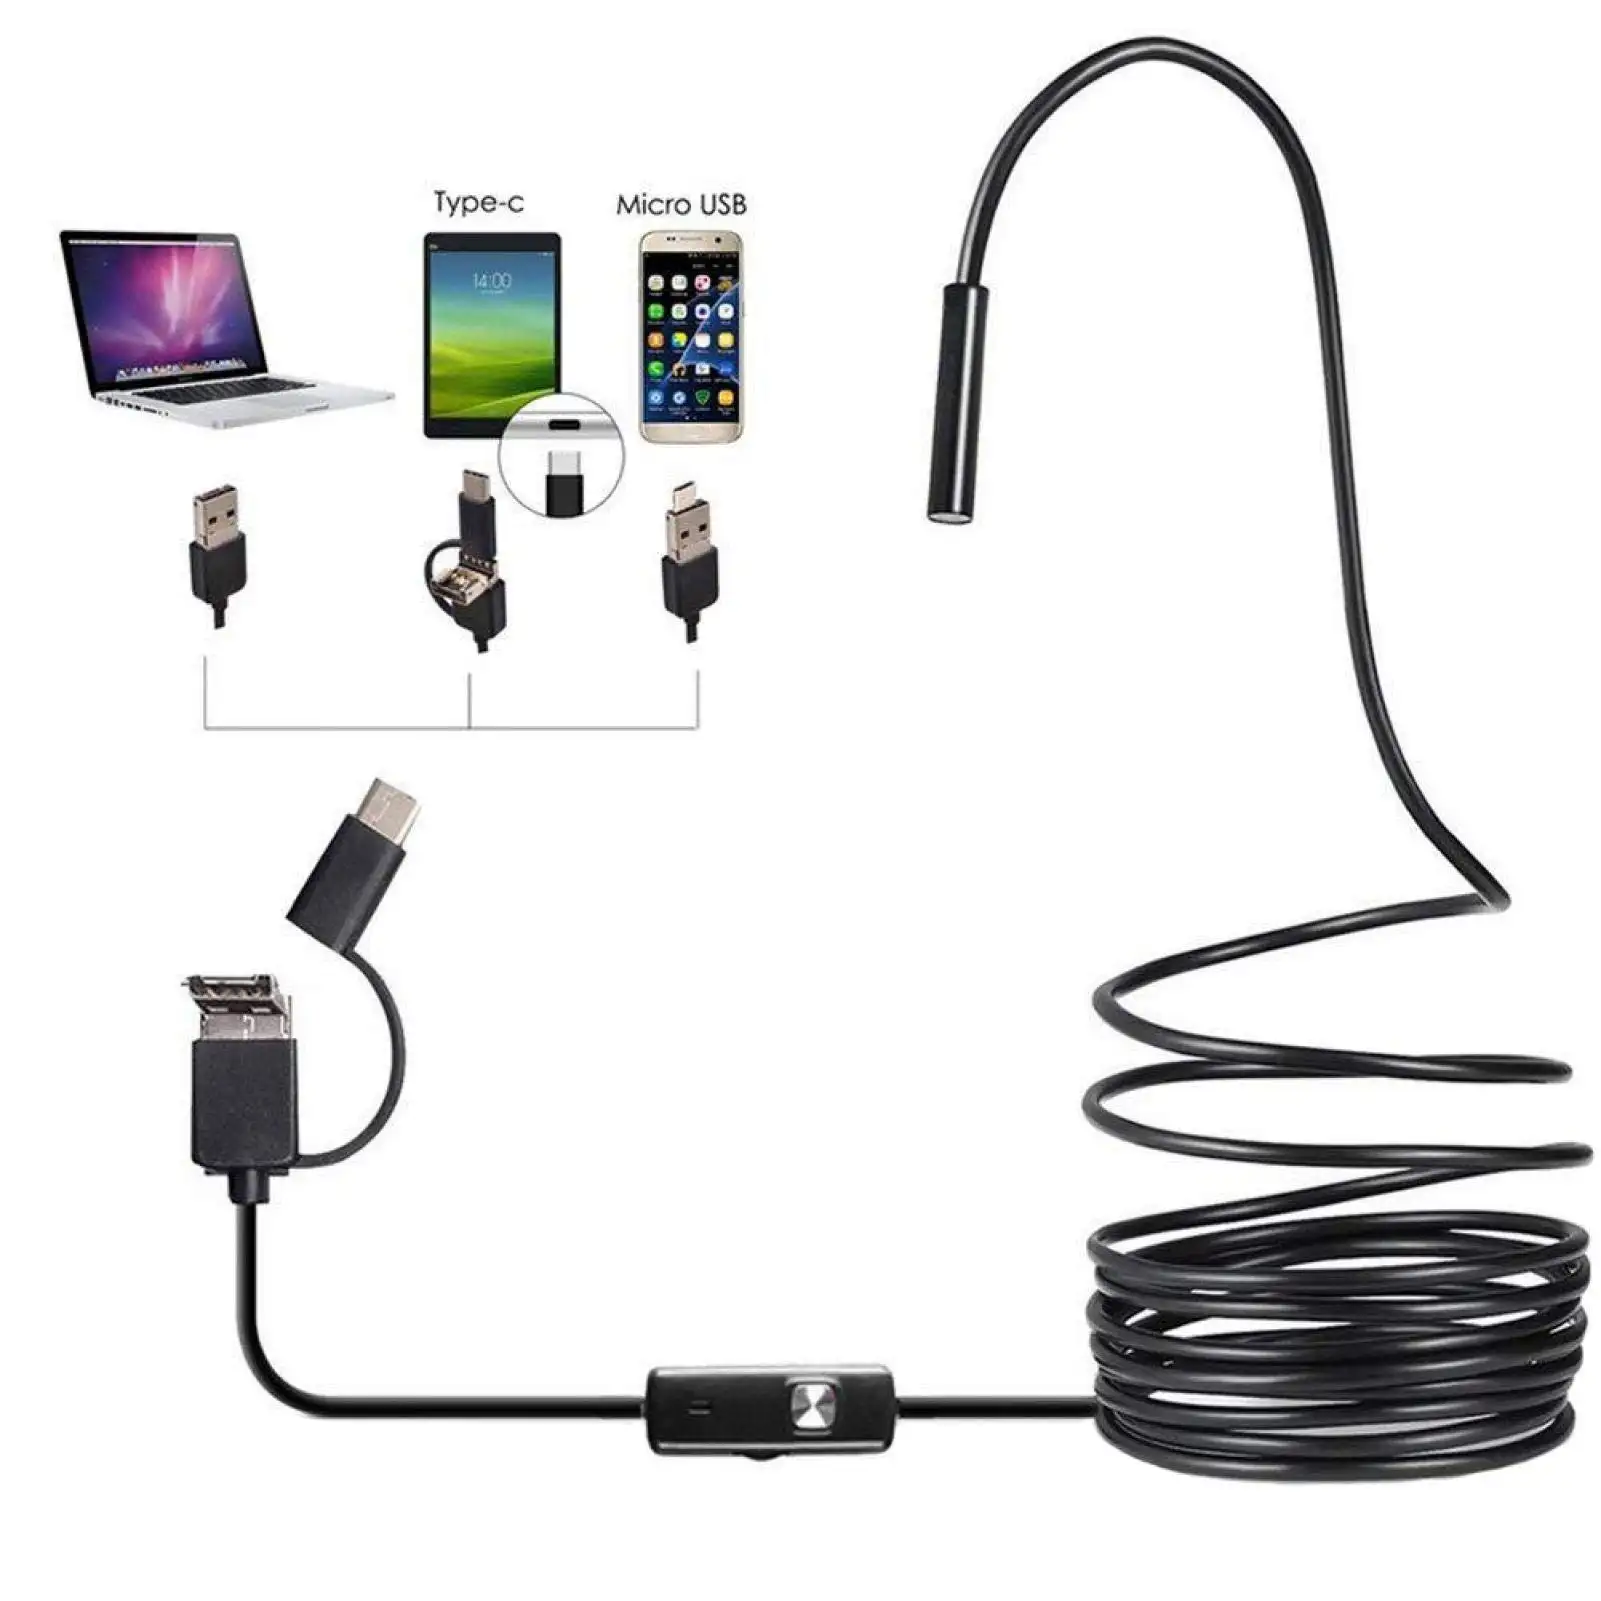 Cheapest Inskam 3 in 1 USB Endoscope Waterproof USB 5.5mm Industrial Borescope Inspection HD Camera Type C for android PC